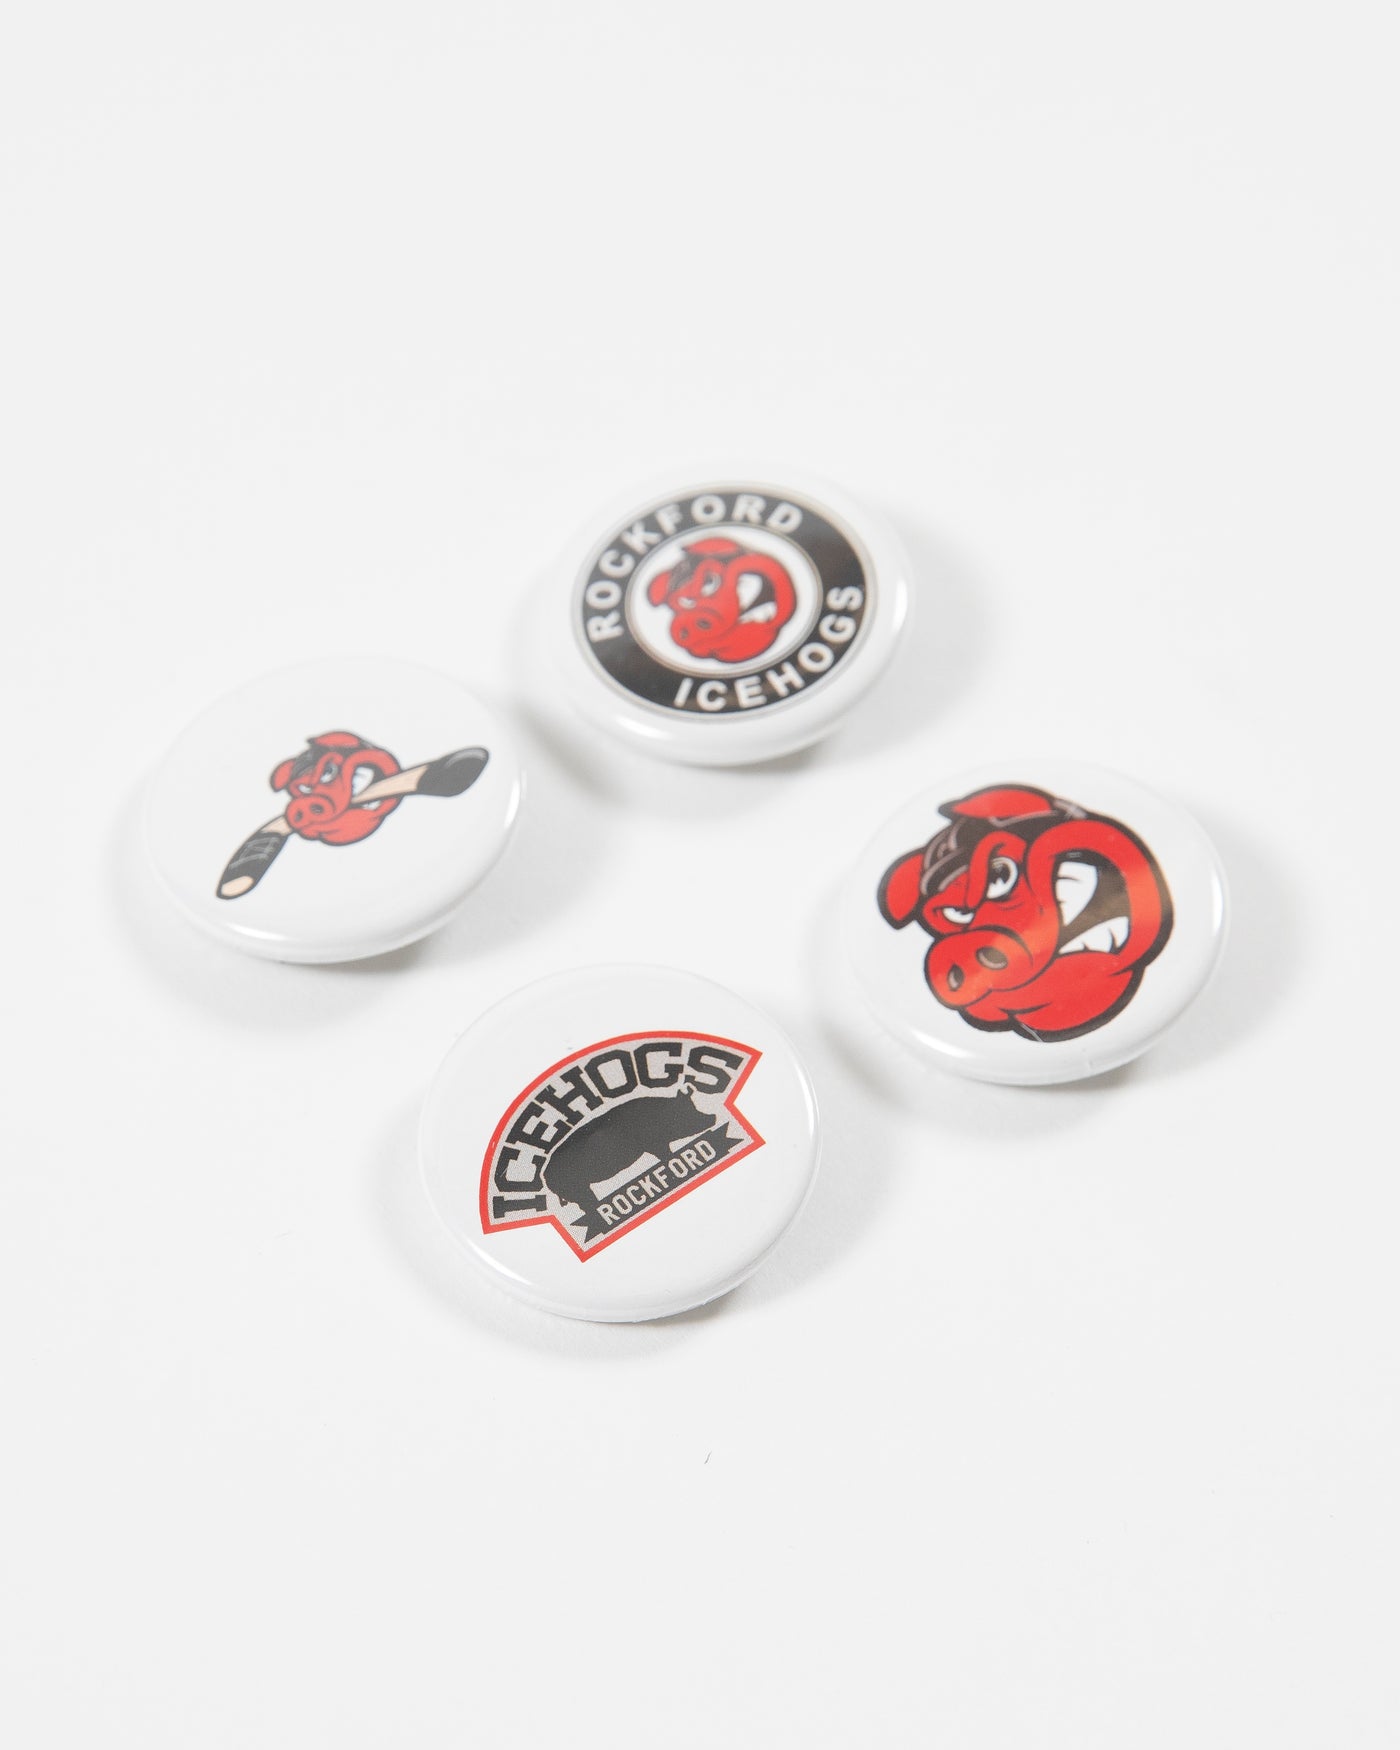 Rockford IceHogs four button pack with assorted graphics - angled lay flat